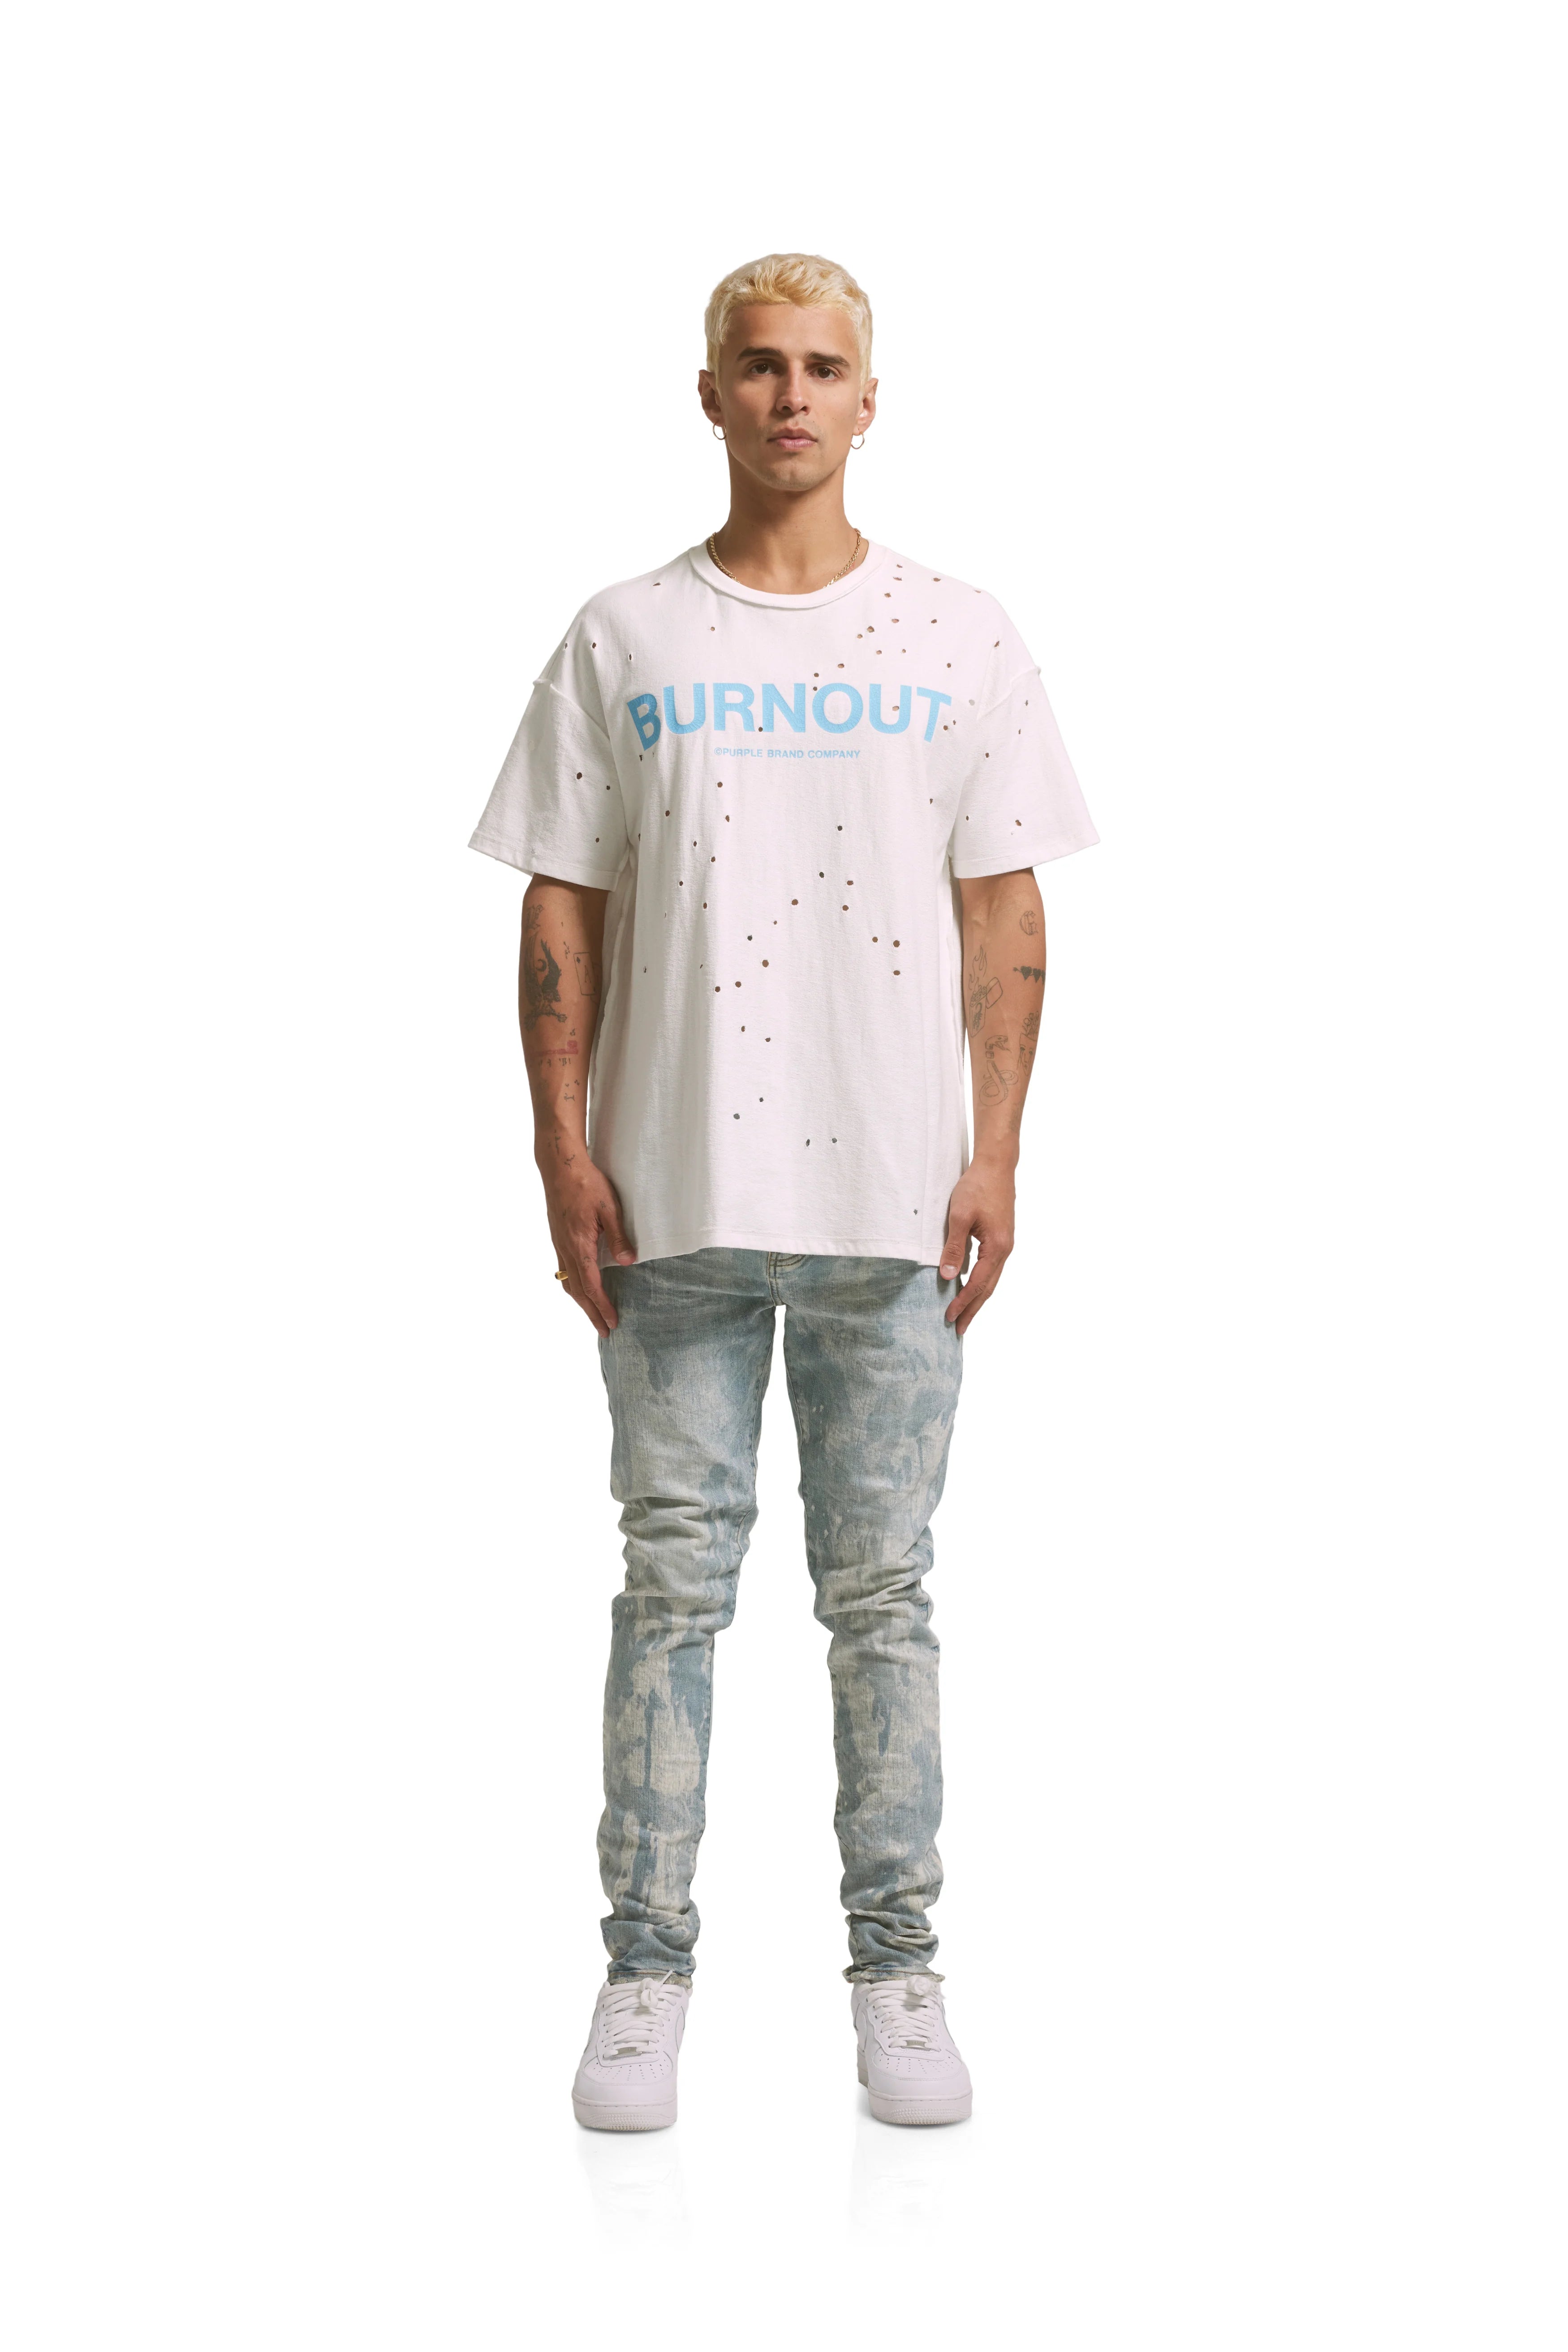 TEXURED JERSEY INSIDE OUT TEE (WHT) - PP101JWBT223